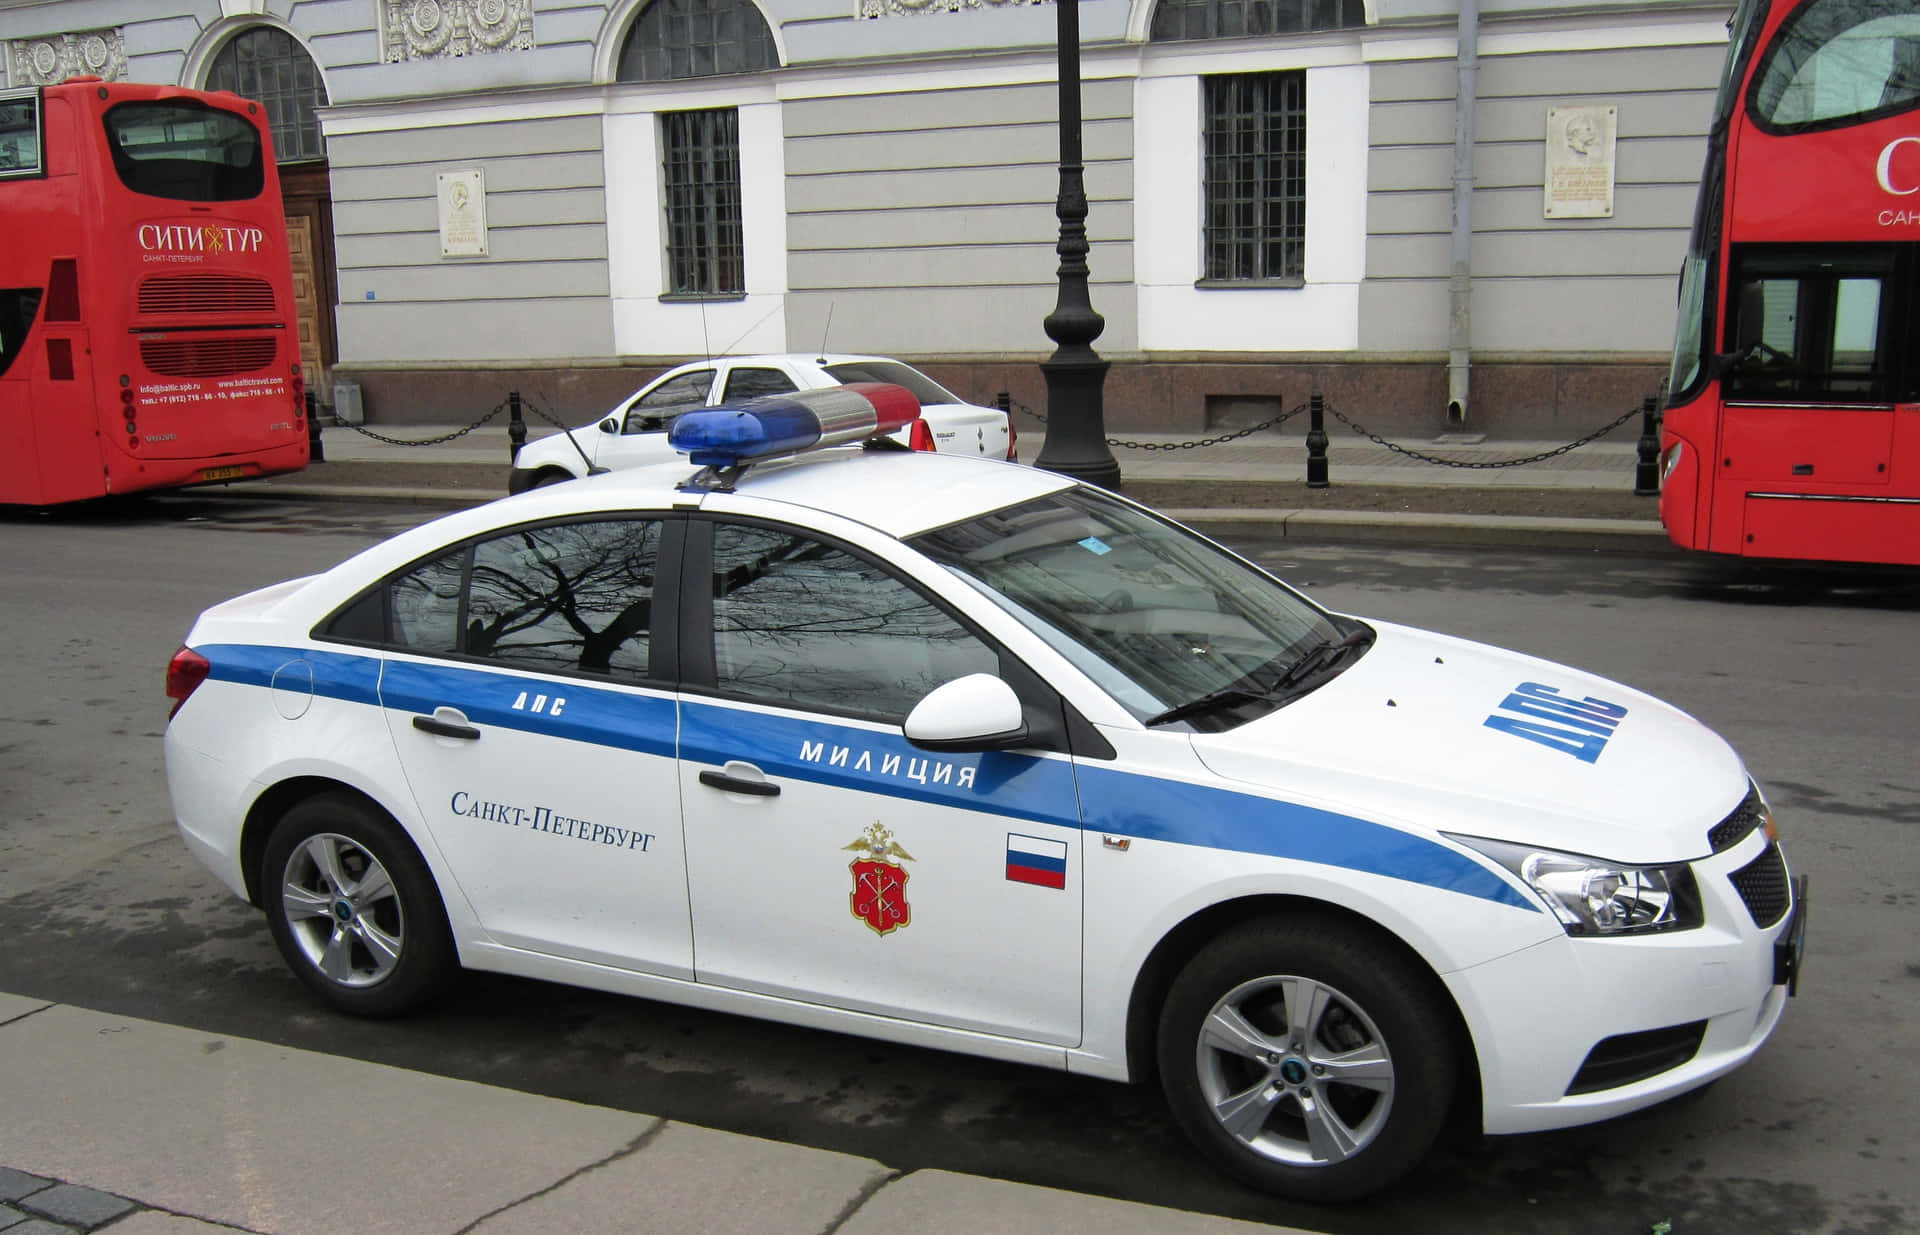 A patrol police car ready to maintain law and order.